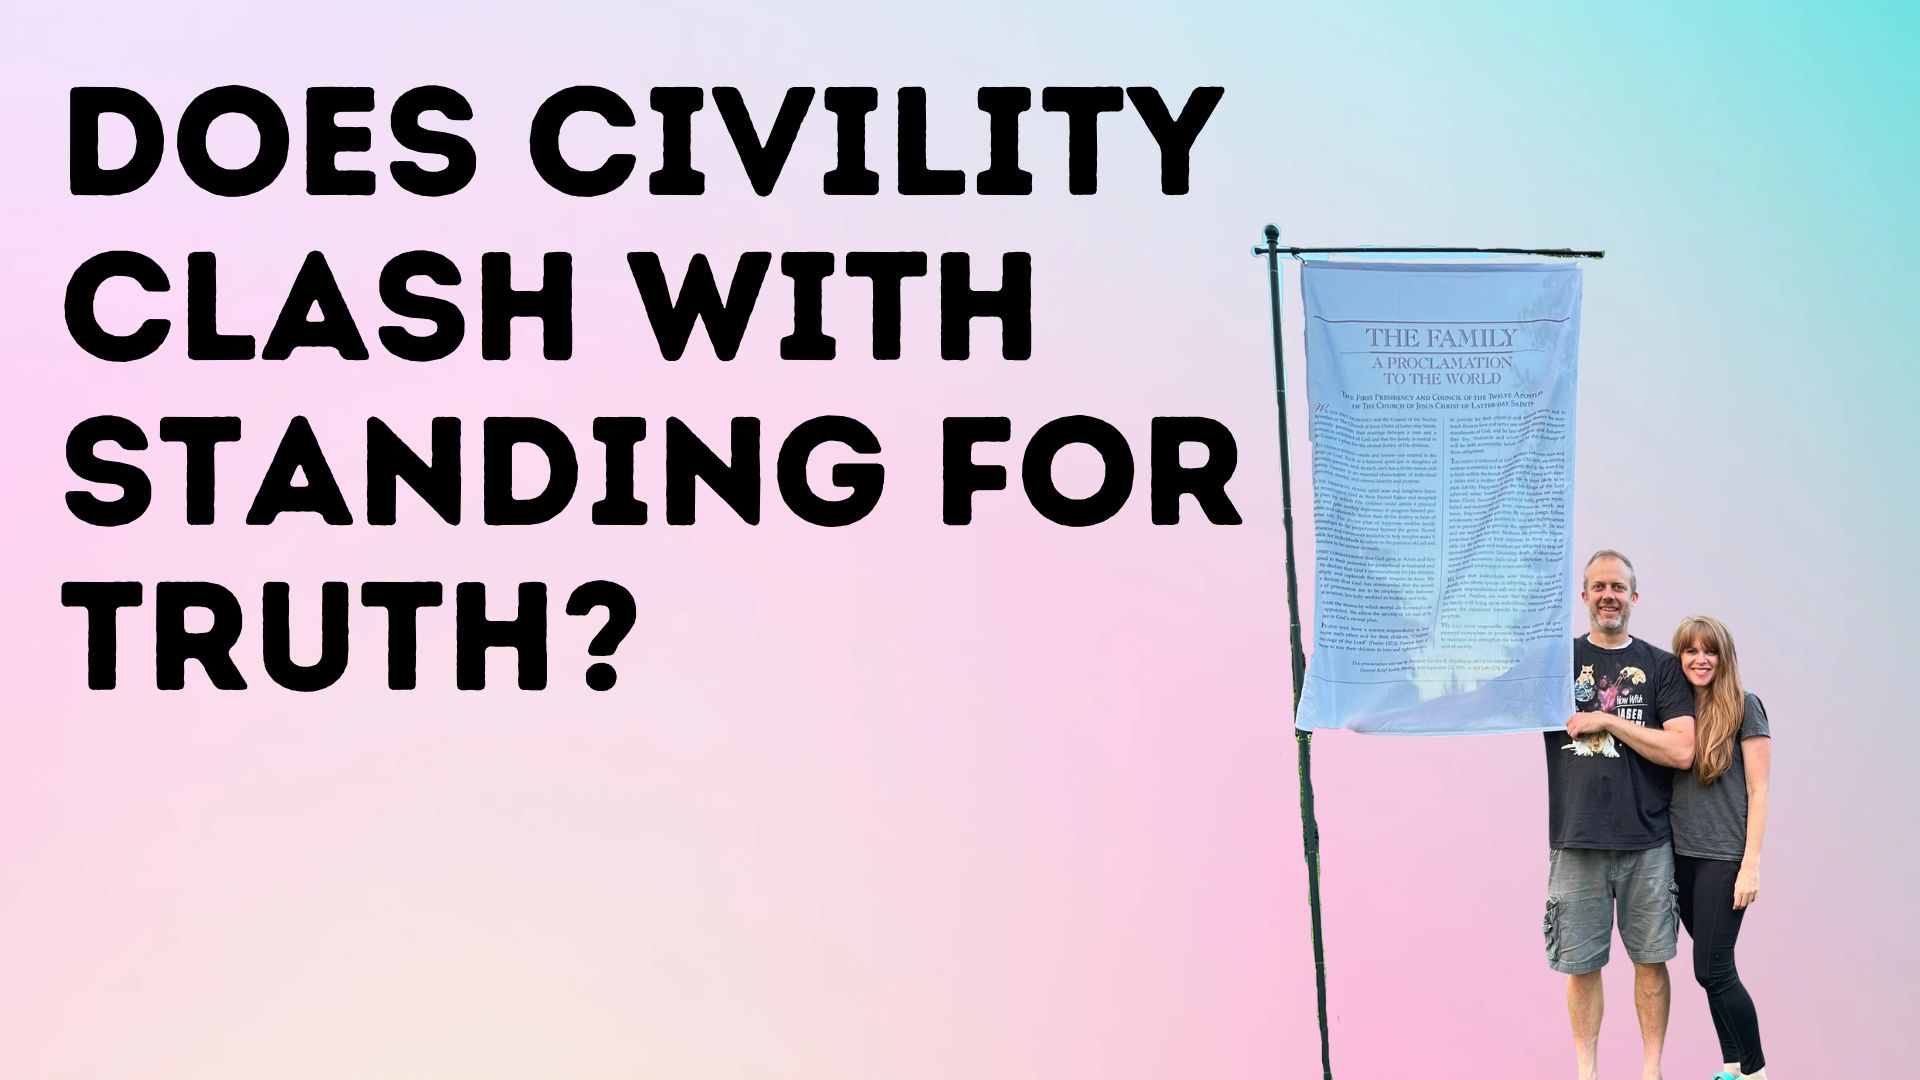 Does civility clash with standing for truth?